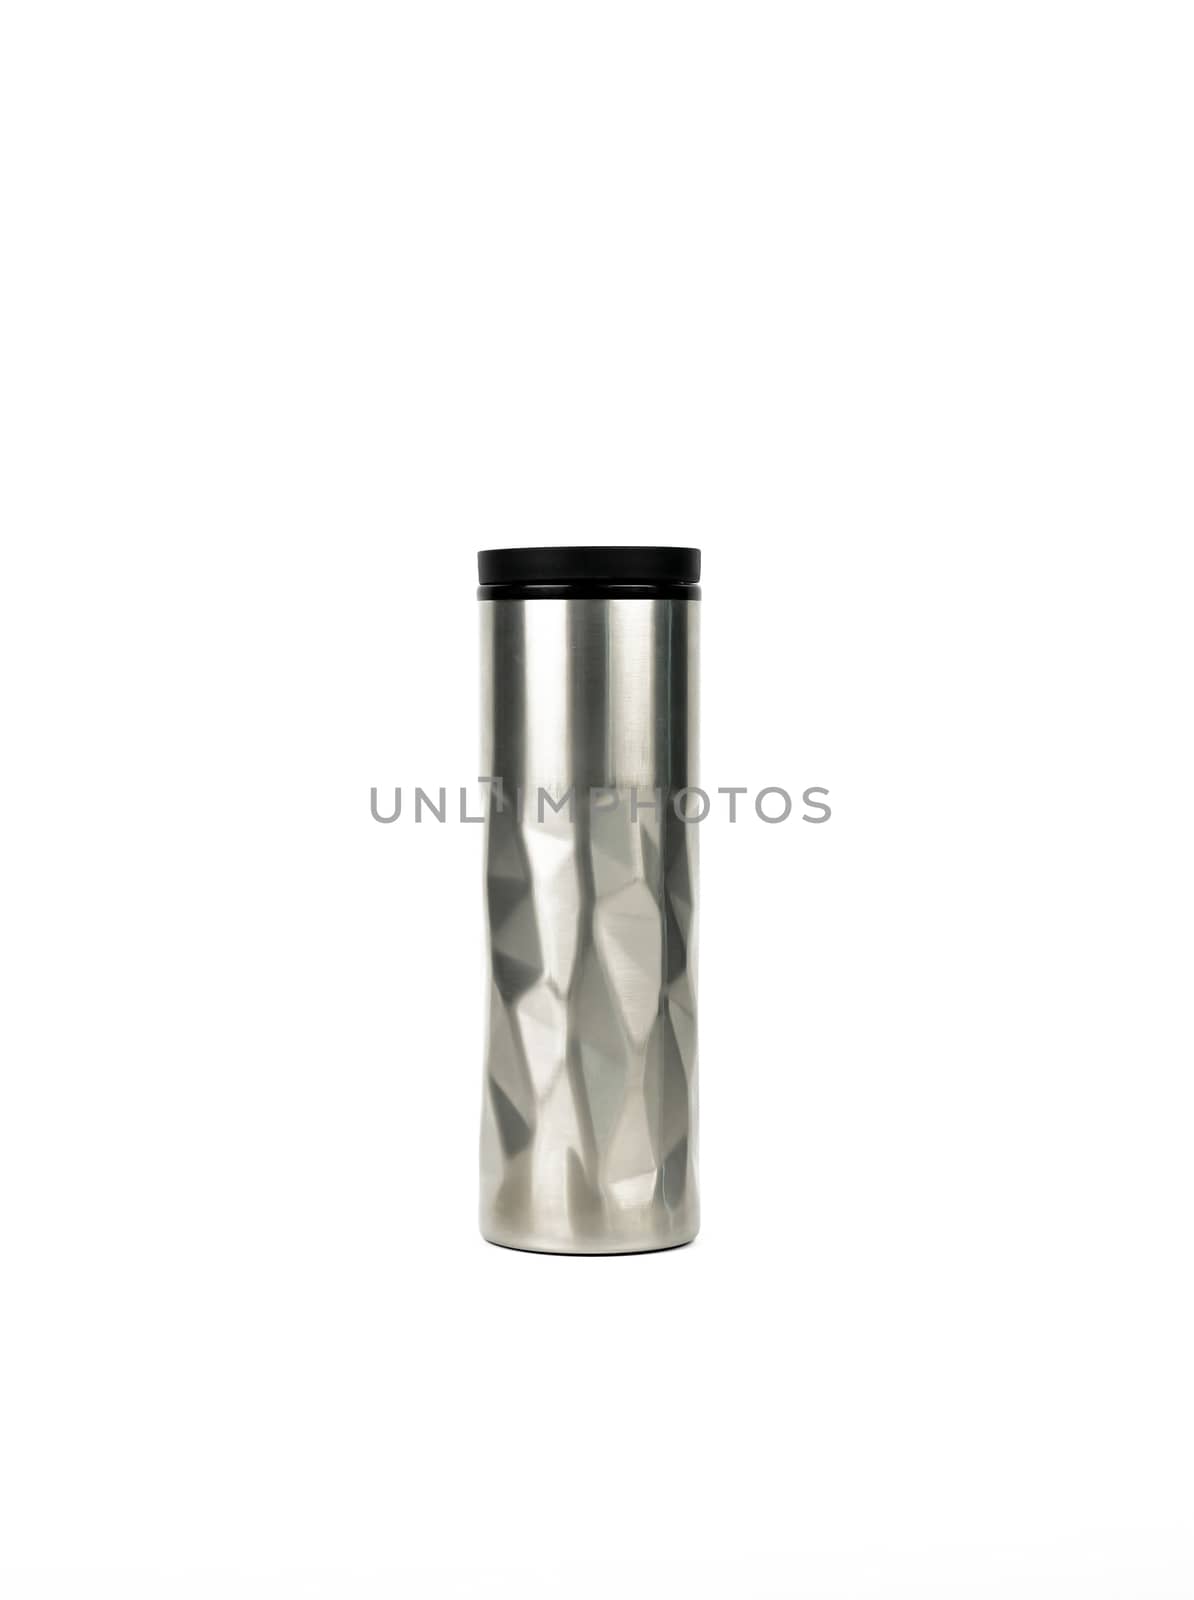 Silver thermos bottle with modern design isolated on white background with copy space. Beverage container. Coffee and tea bottle.